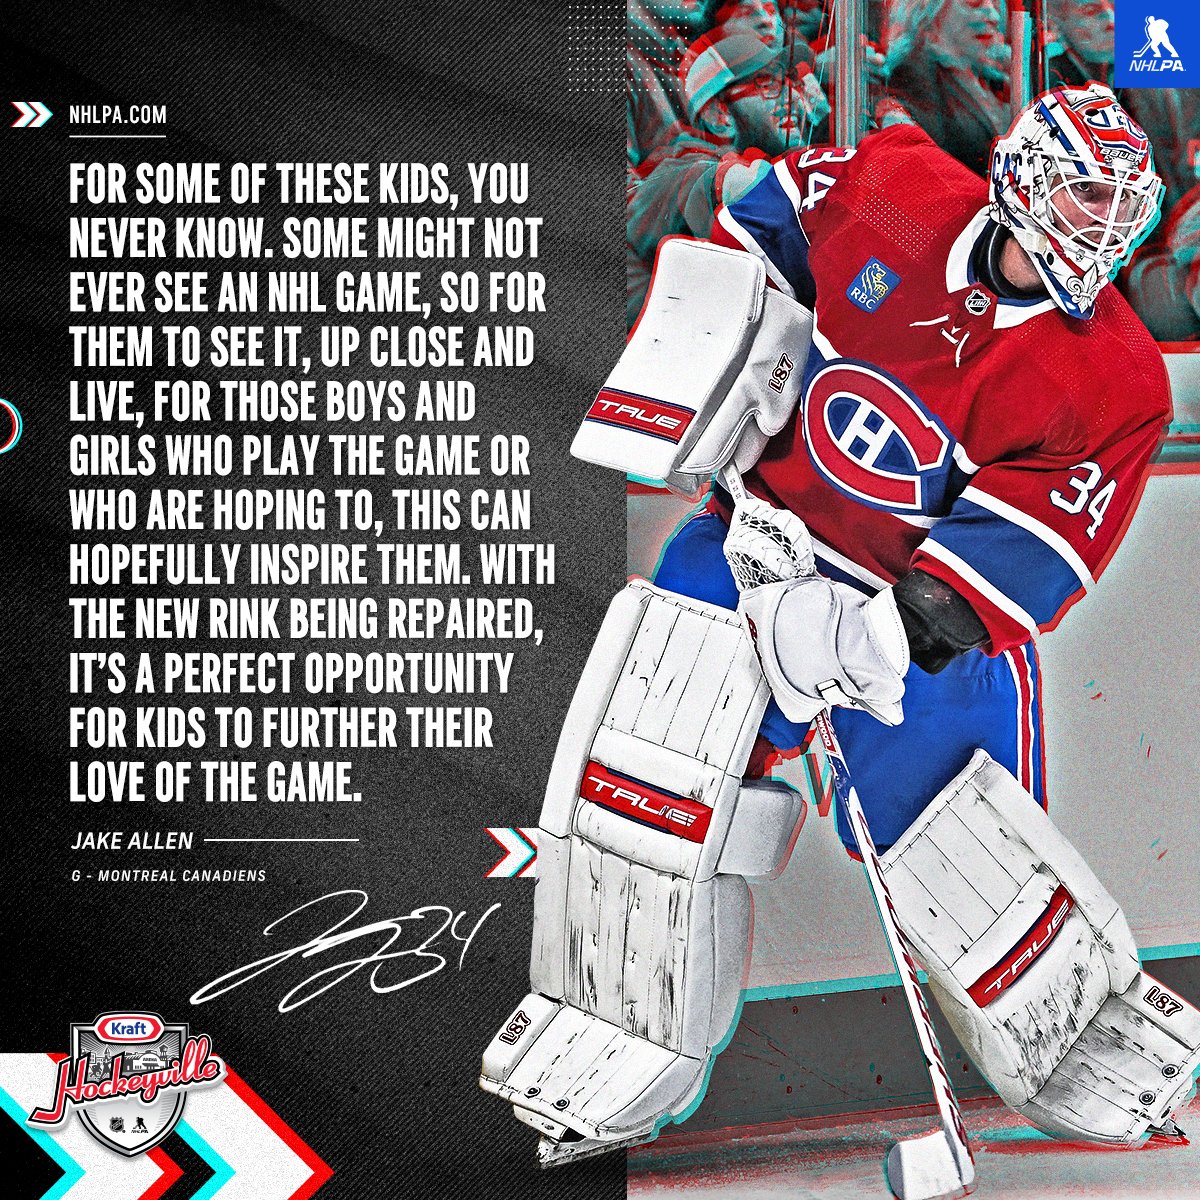 Participating in #KraftHockeyville in his home province of New Brunswick, @CanadiensMTL goaltender @34jallen hopes the event can help inspire hockey playing youth from Canada’s east coast: ply.rs/r53paskukcl